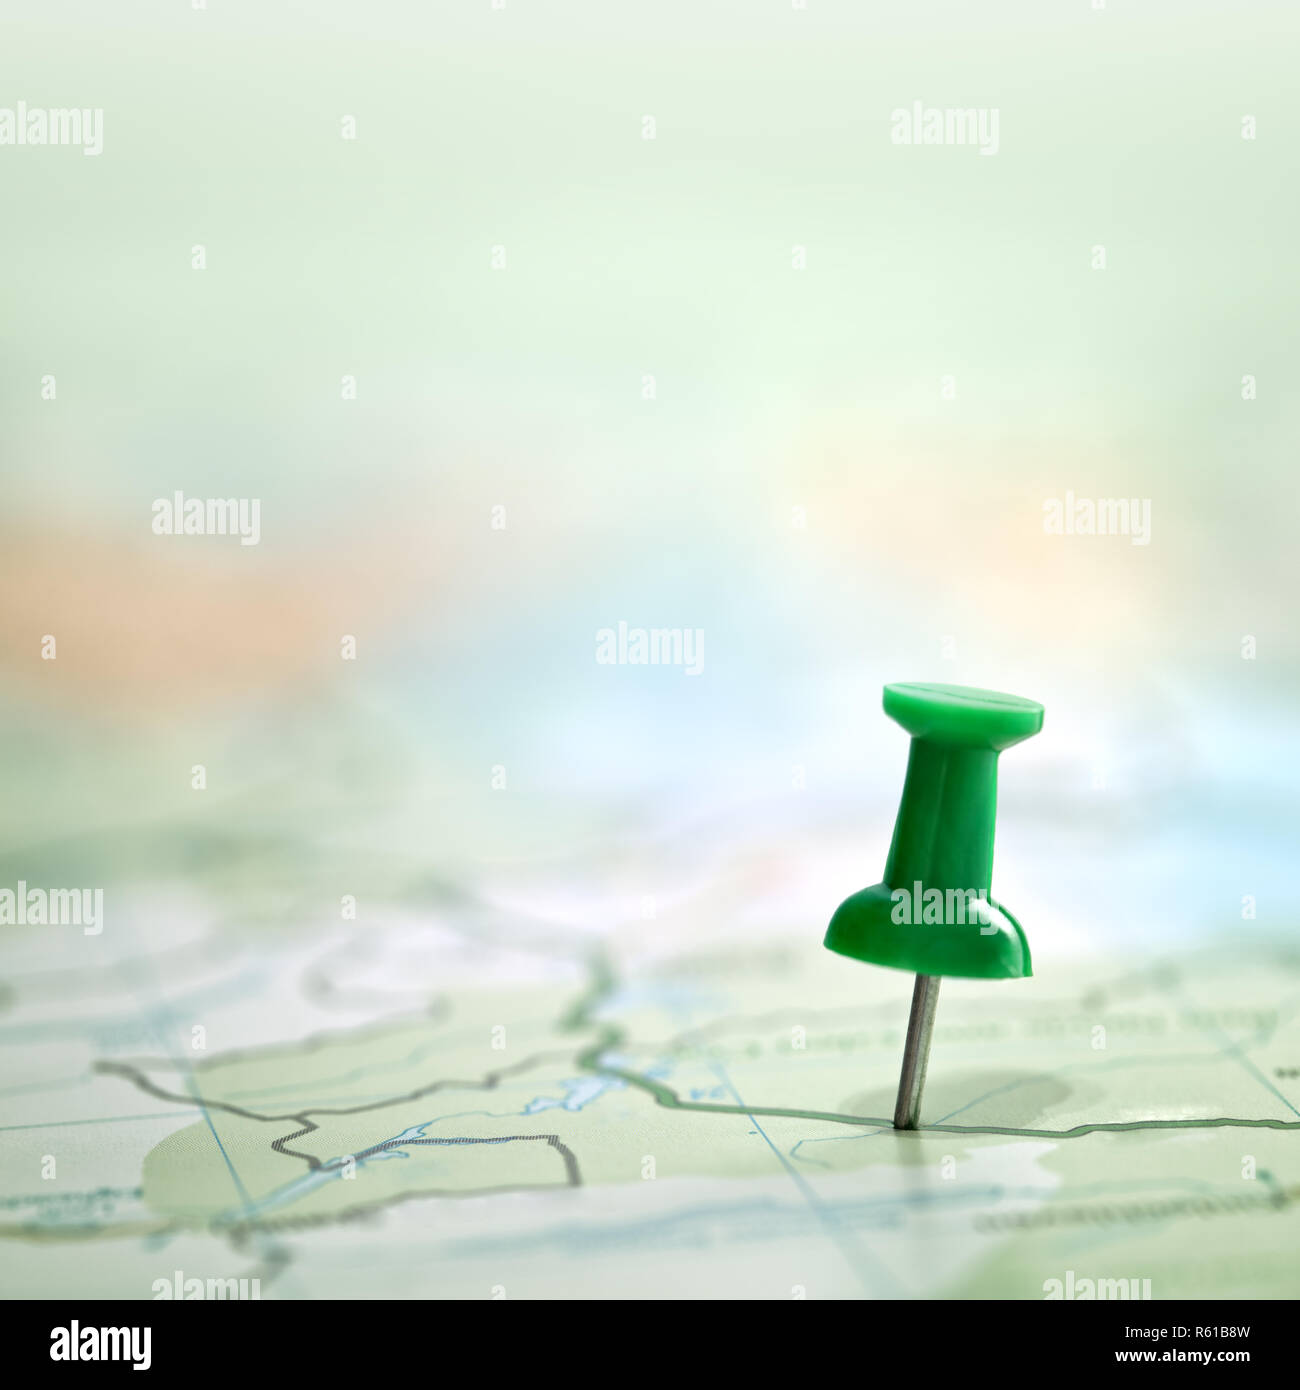 Pushpin showing the location of a destination point on a green map Stock Photo